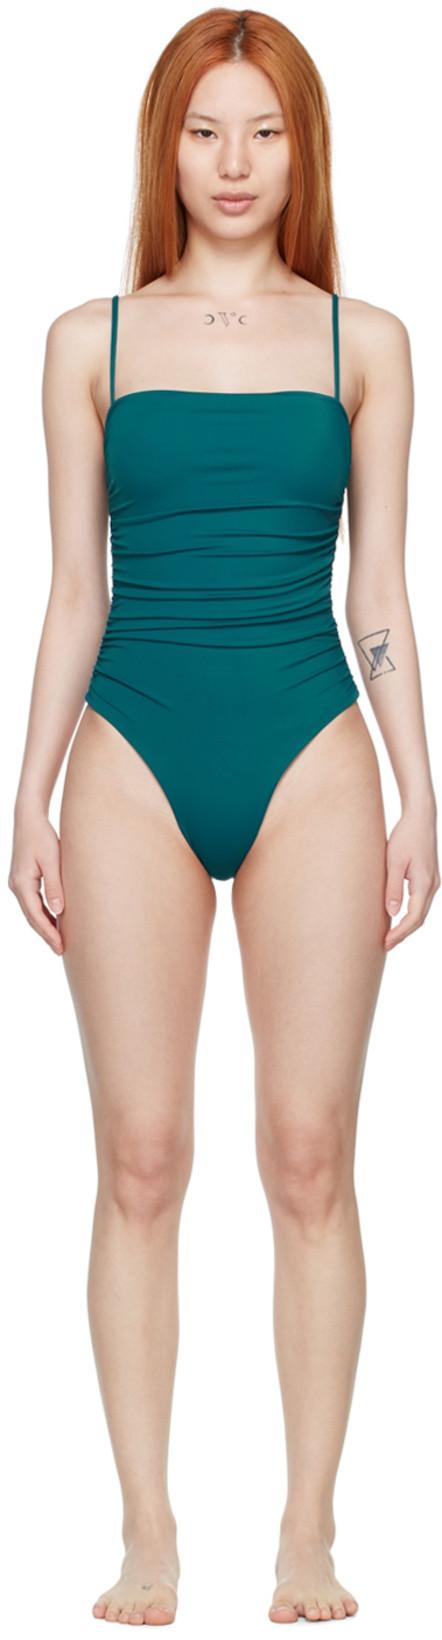 SSENSE Exclusive Blue Recycled Nylon One-Piece Swimsuit by BELLE THE LABEL